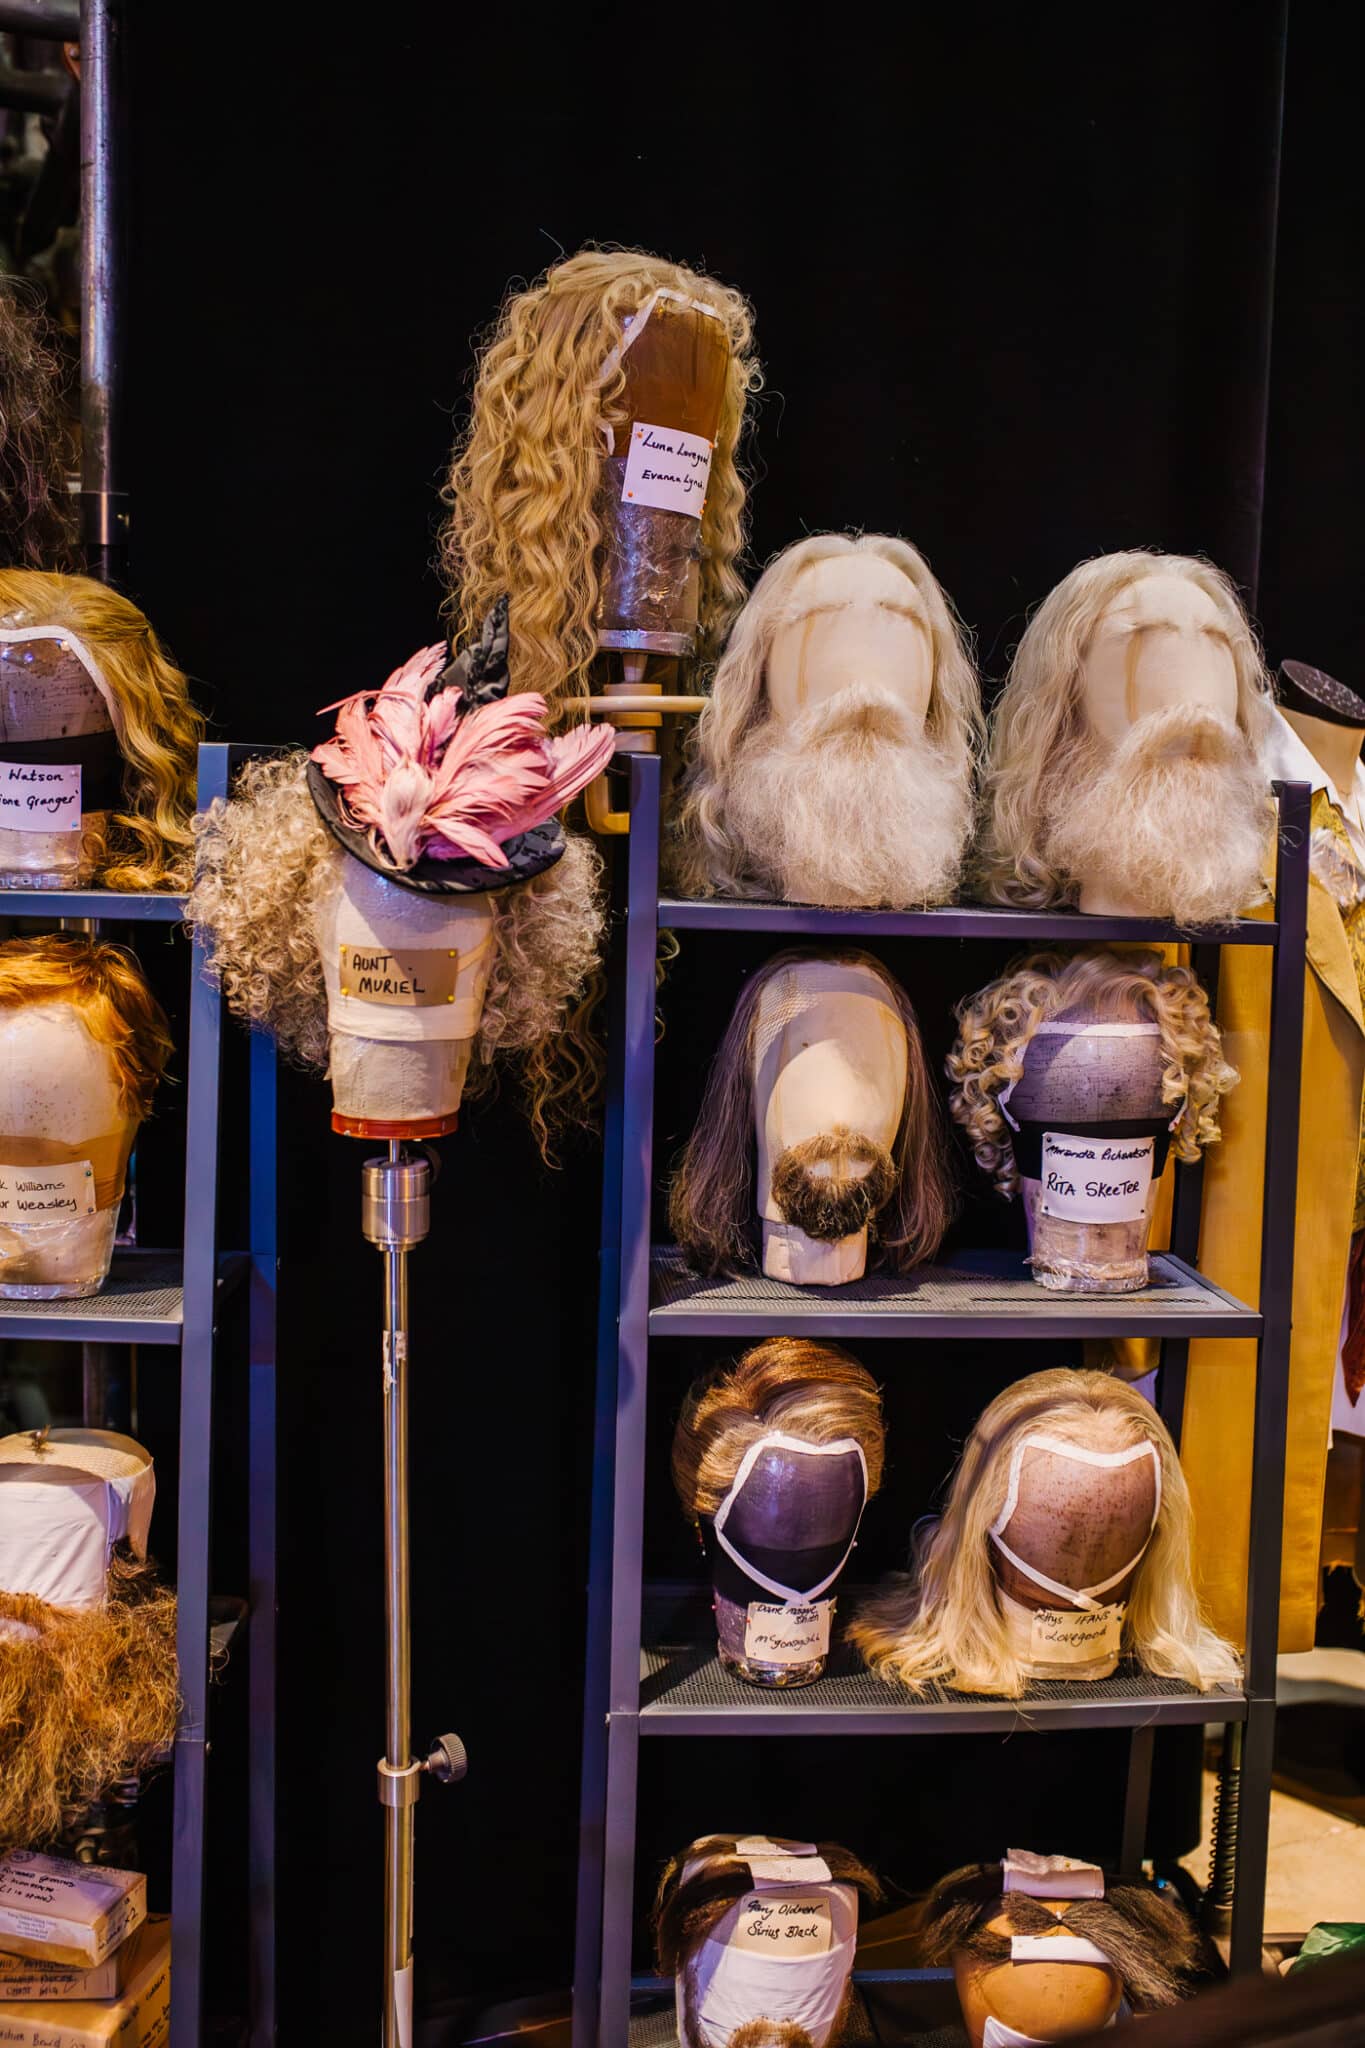 Harry Potter Studios costume design with a shelf full of wigs and costumes used in the Harry Potter films. 